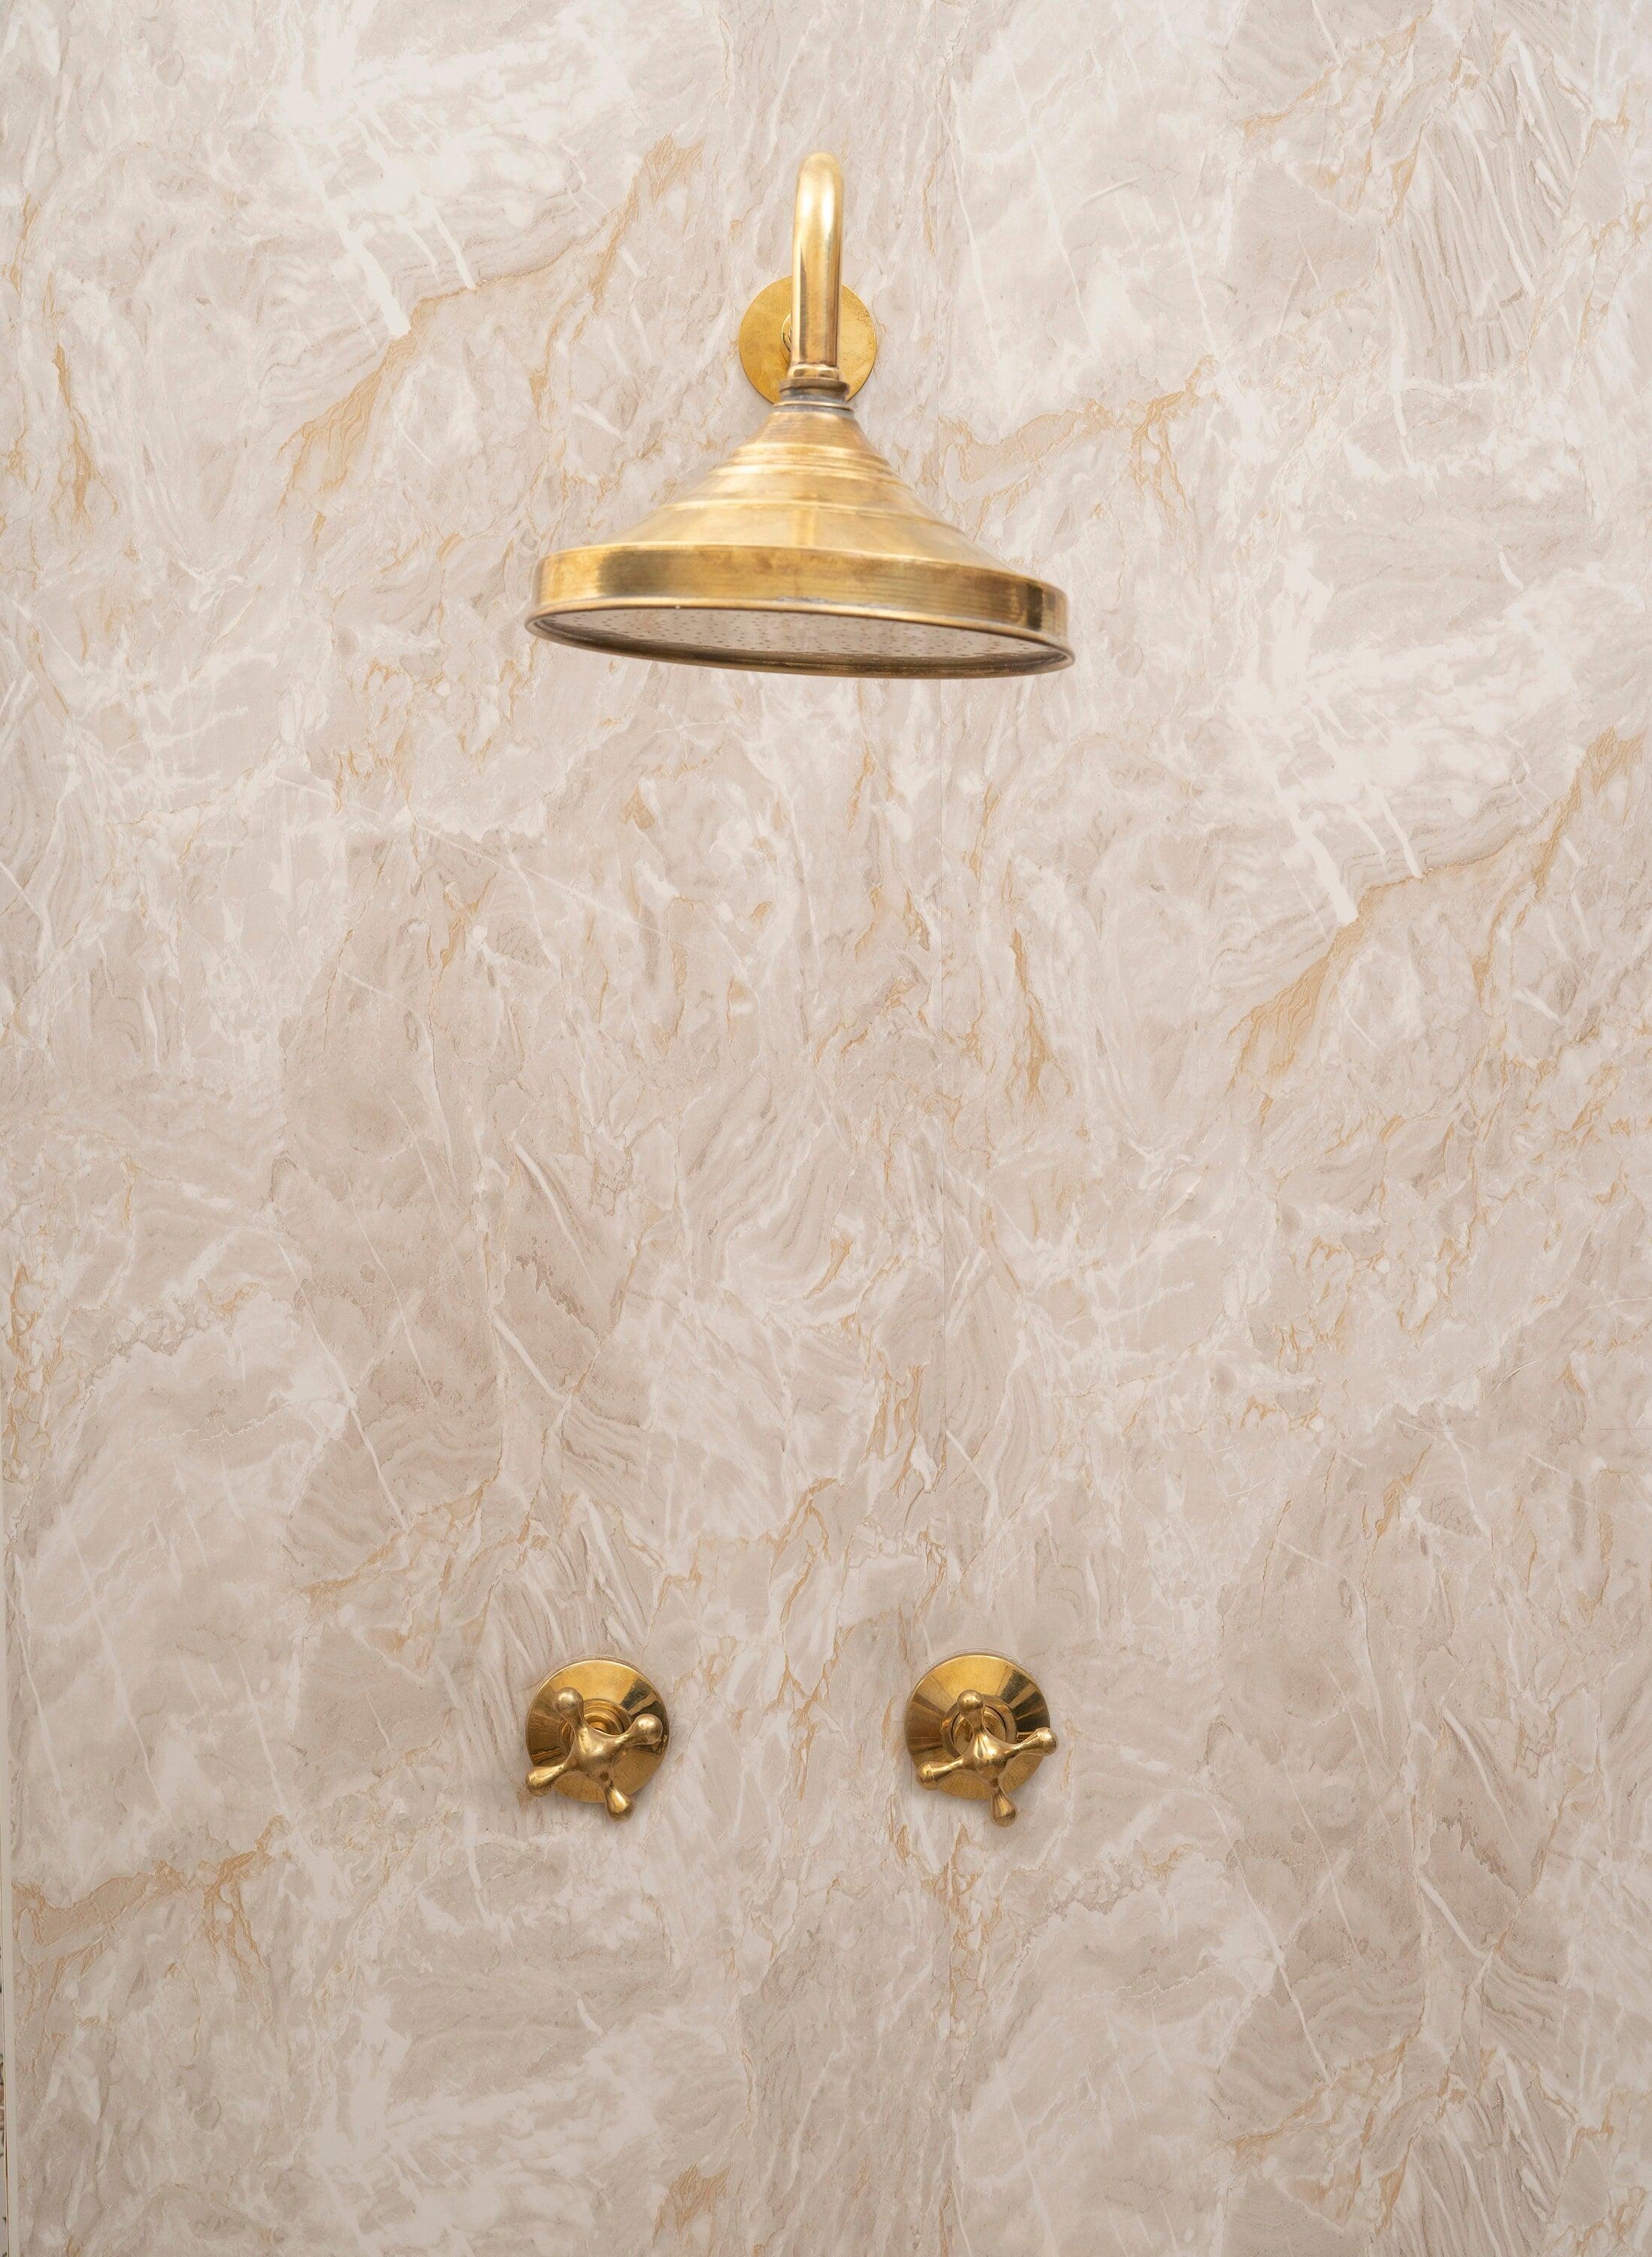 Unlacquered Brass Shower System with Handels & Rough-In Valve included Zayian